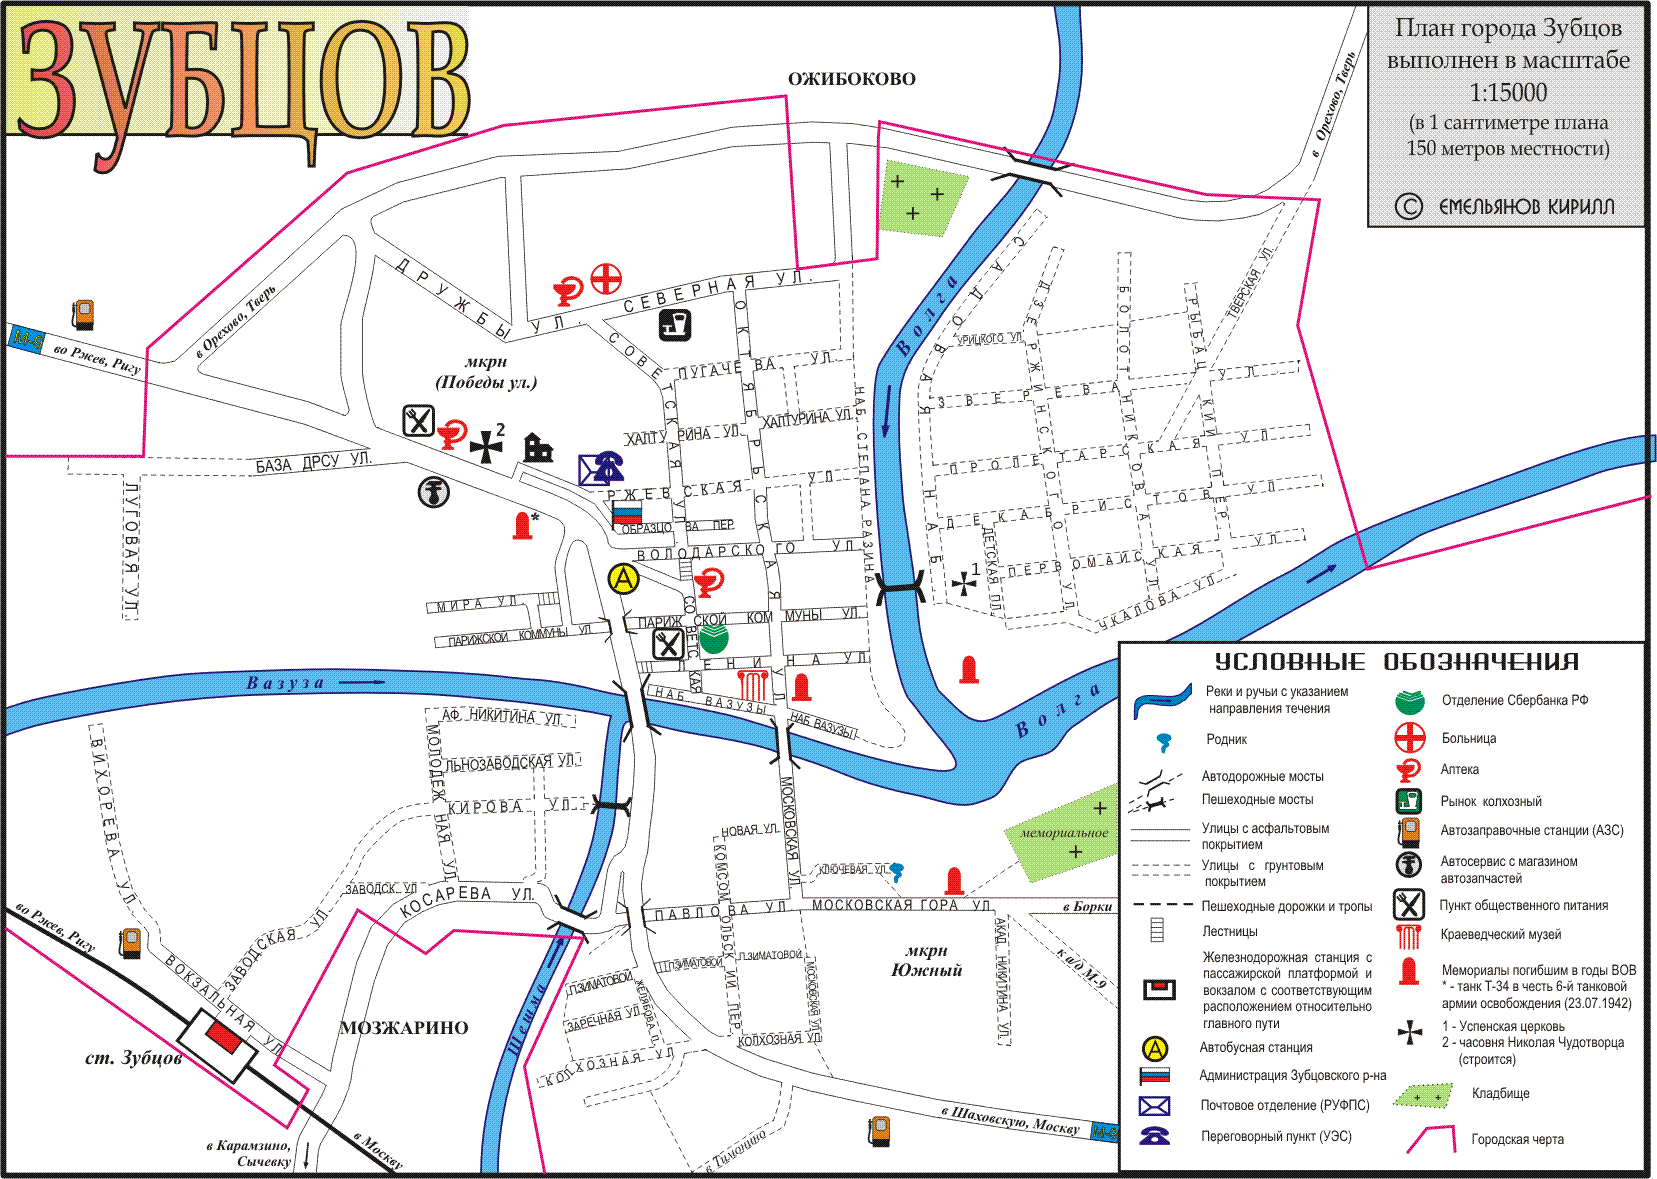 Map of Zubtsovo